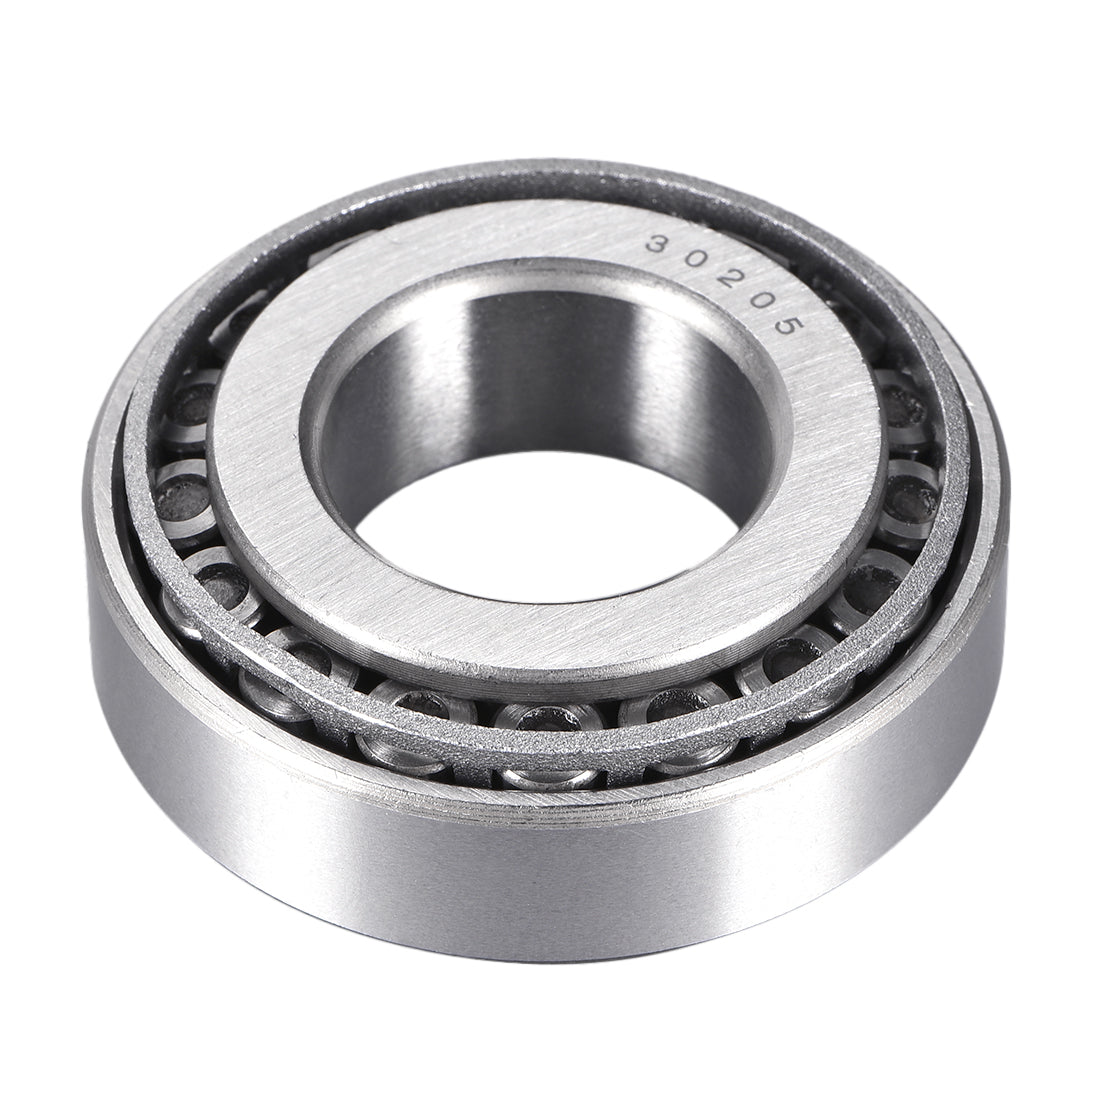 uxcell Uxcell Tapered Roller Bearing Cone and Cup Set Chrome Steel Metric